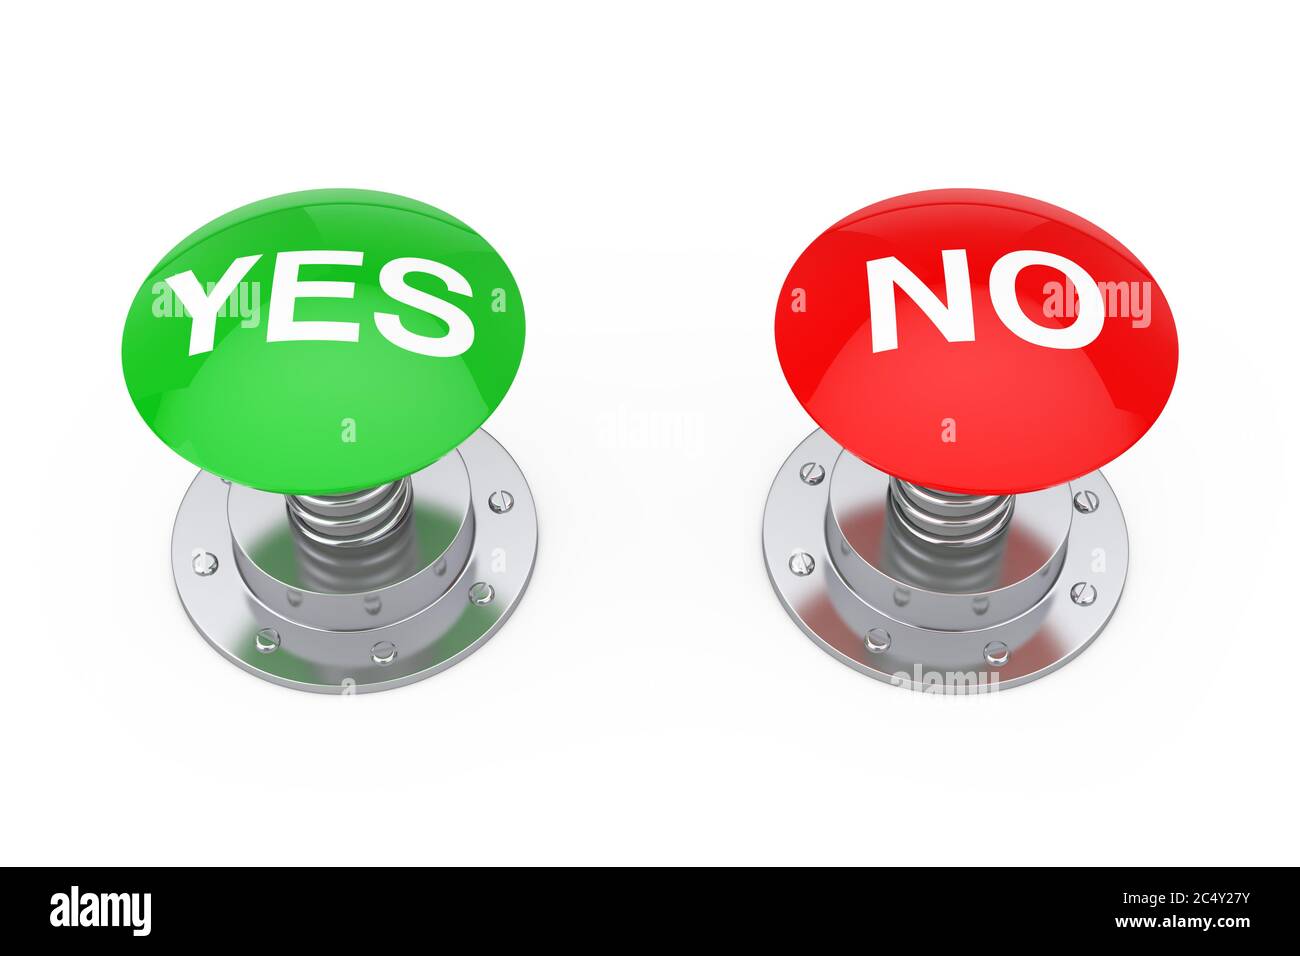 Green Yes and Red No Buttons Knobs on a white background. 3d Rendering Stock Photo